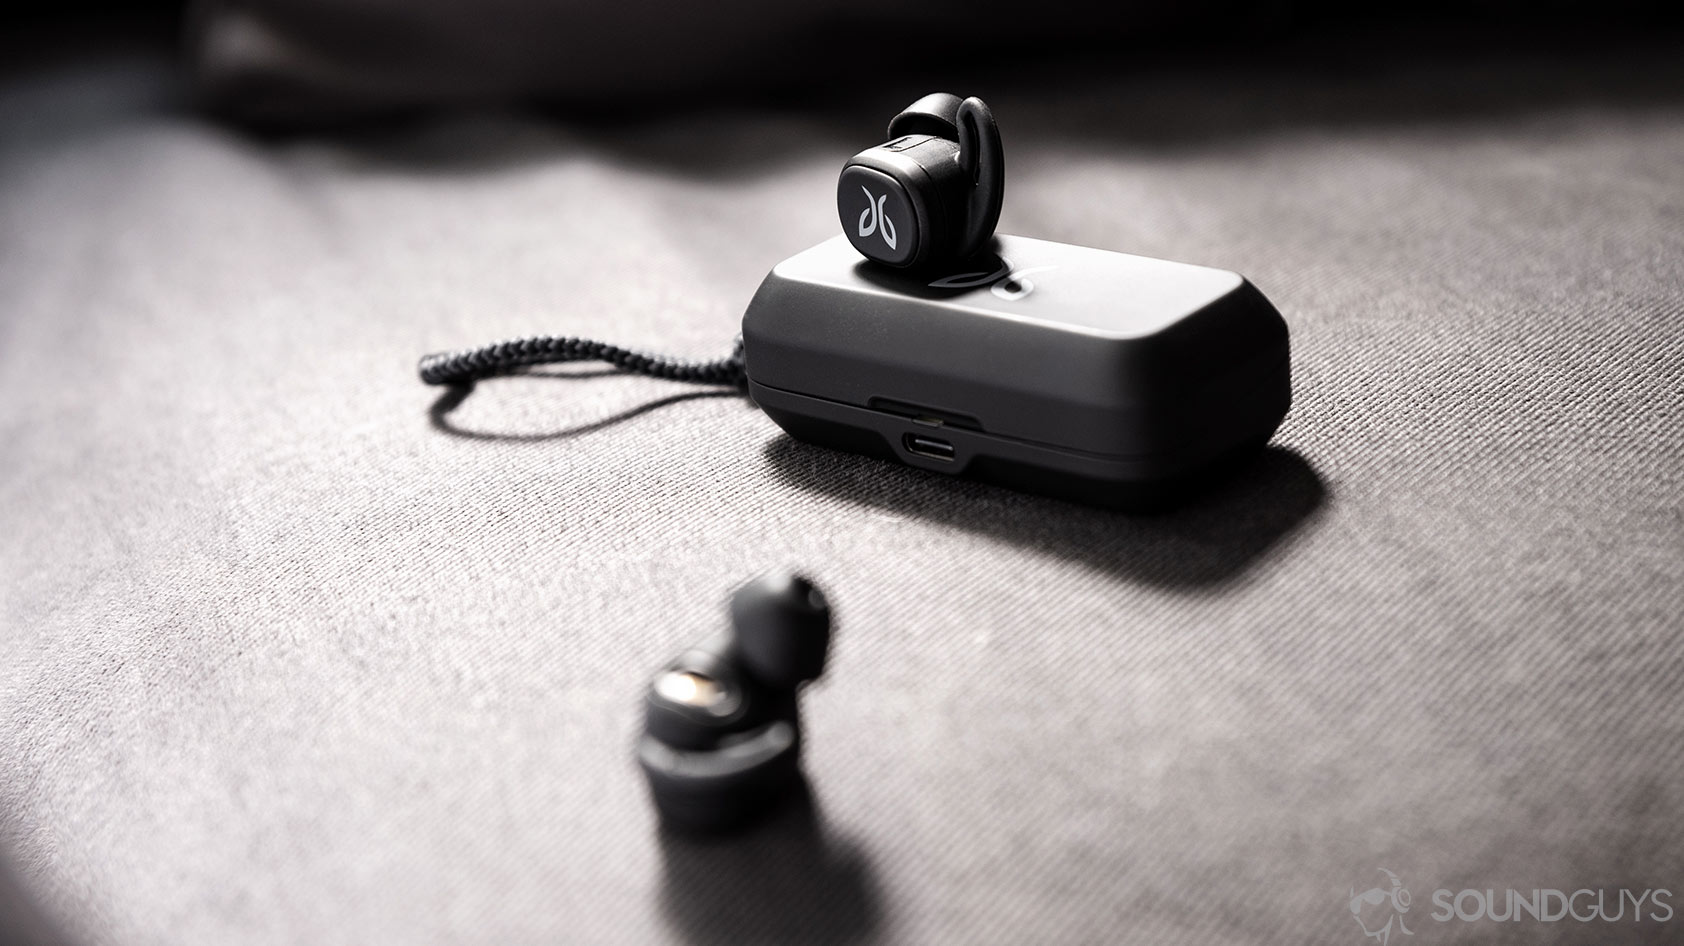 An image of the Jaybird Vista earbuds outside of the case with one resting on top and the other in the foreground.